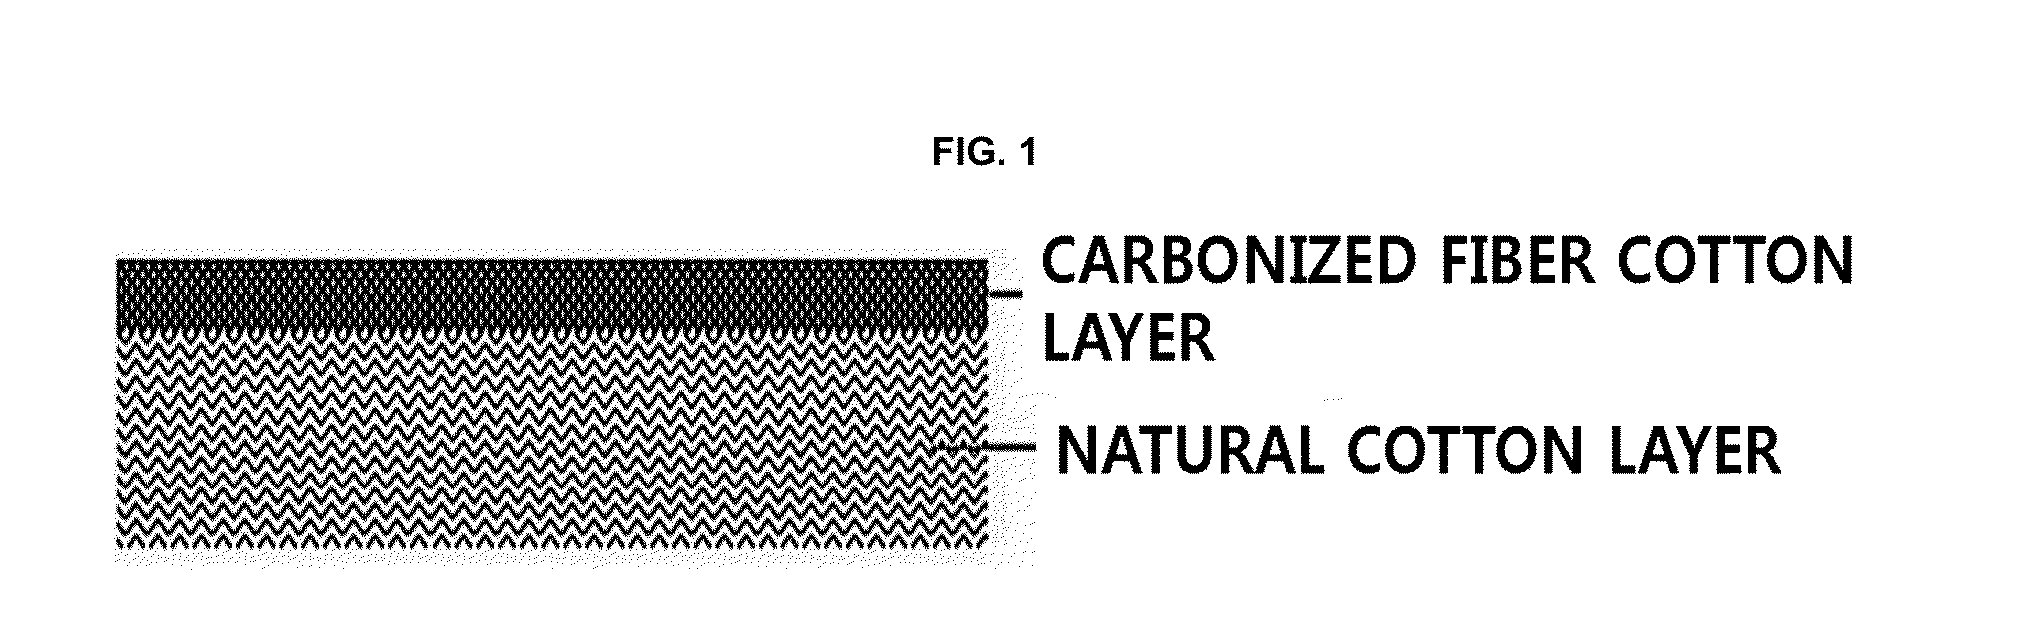 Multipurpose functional nonwoven fiber, and method for manufacturing same